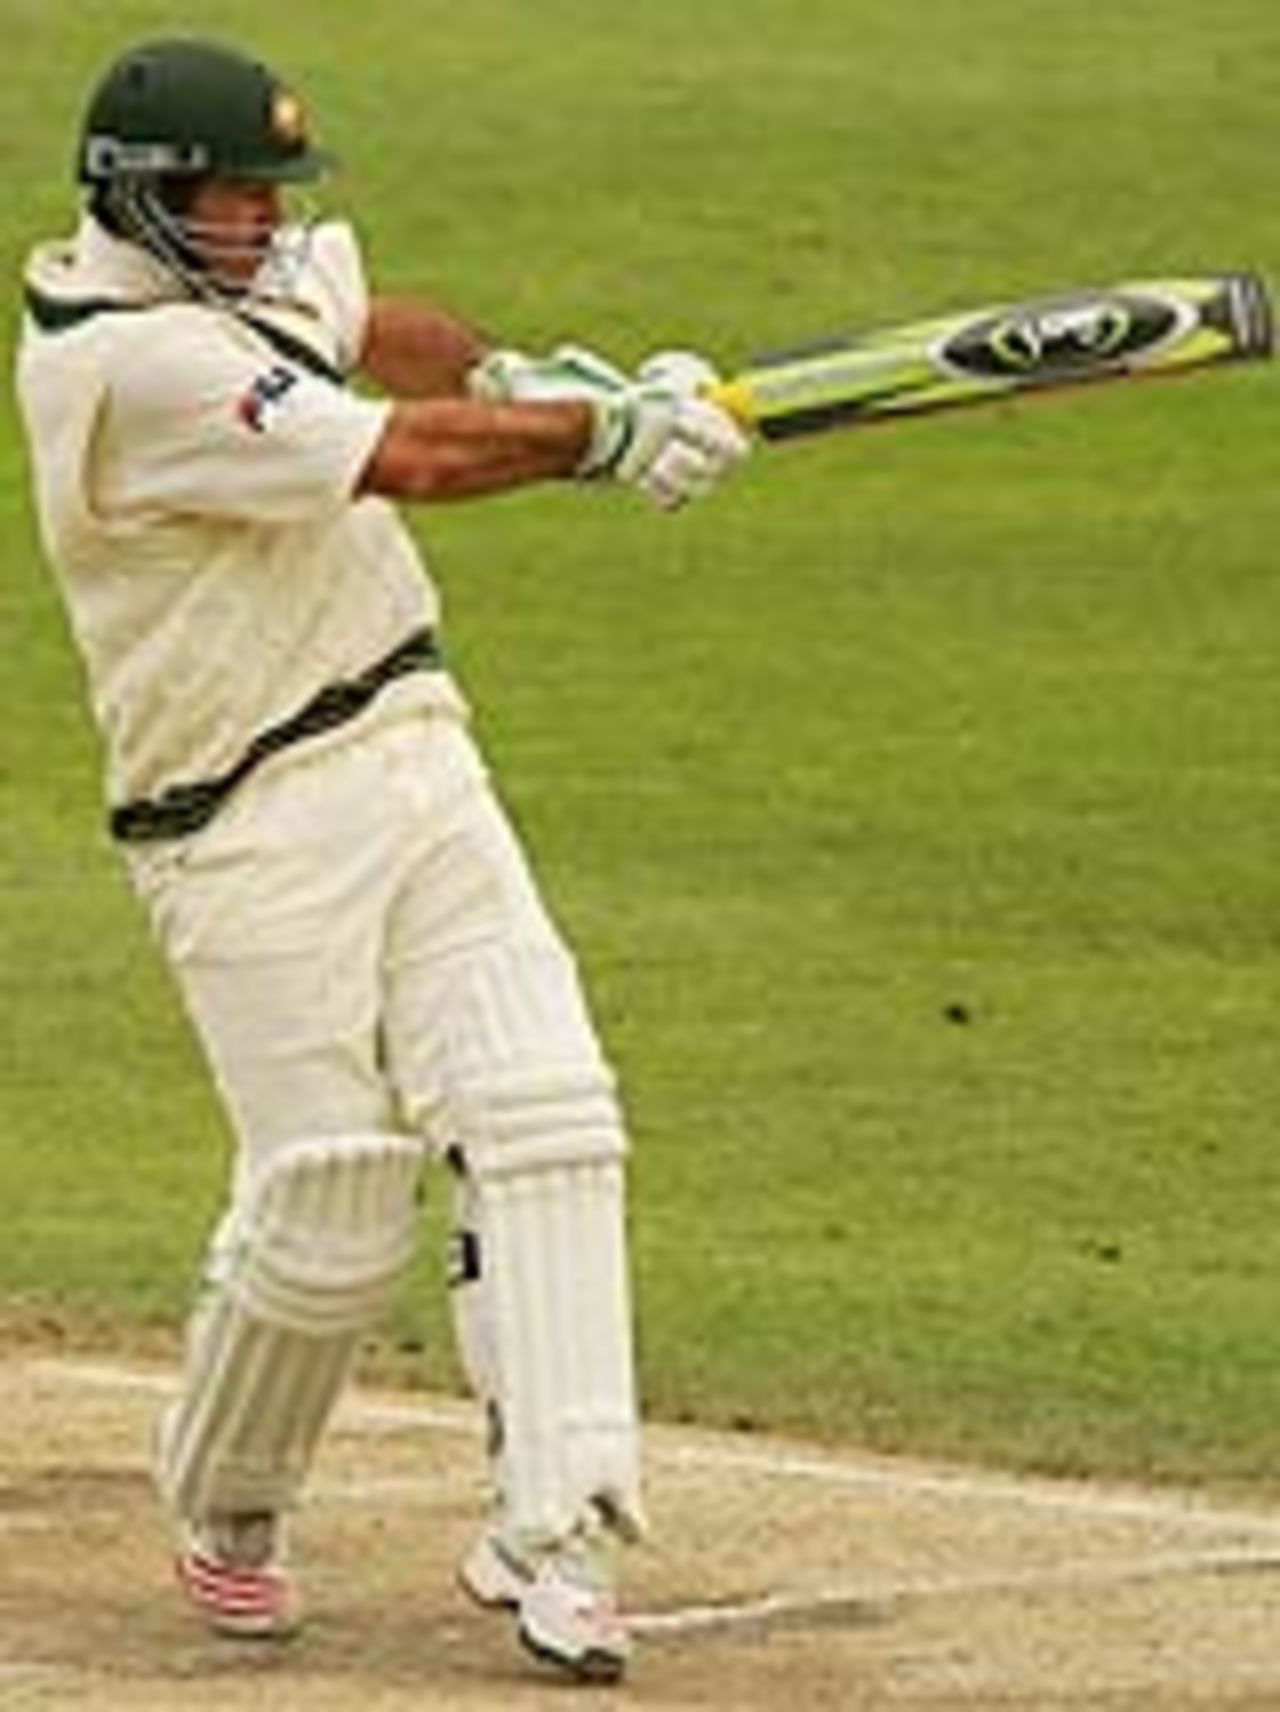 Ricky Ponting slammed a quickfire 82, New Zealand v Australia, 3rd Test, Auckland, 4th day, March 29, 2005